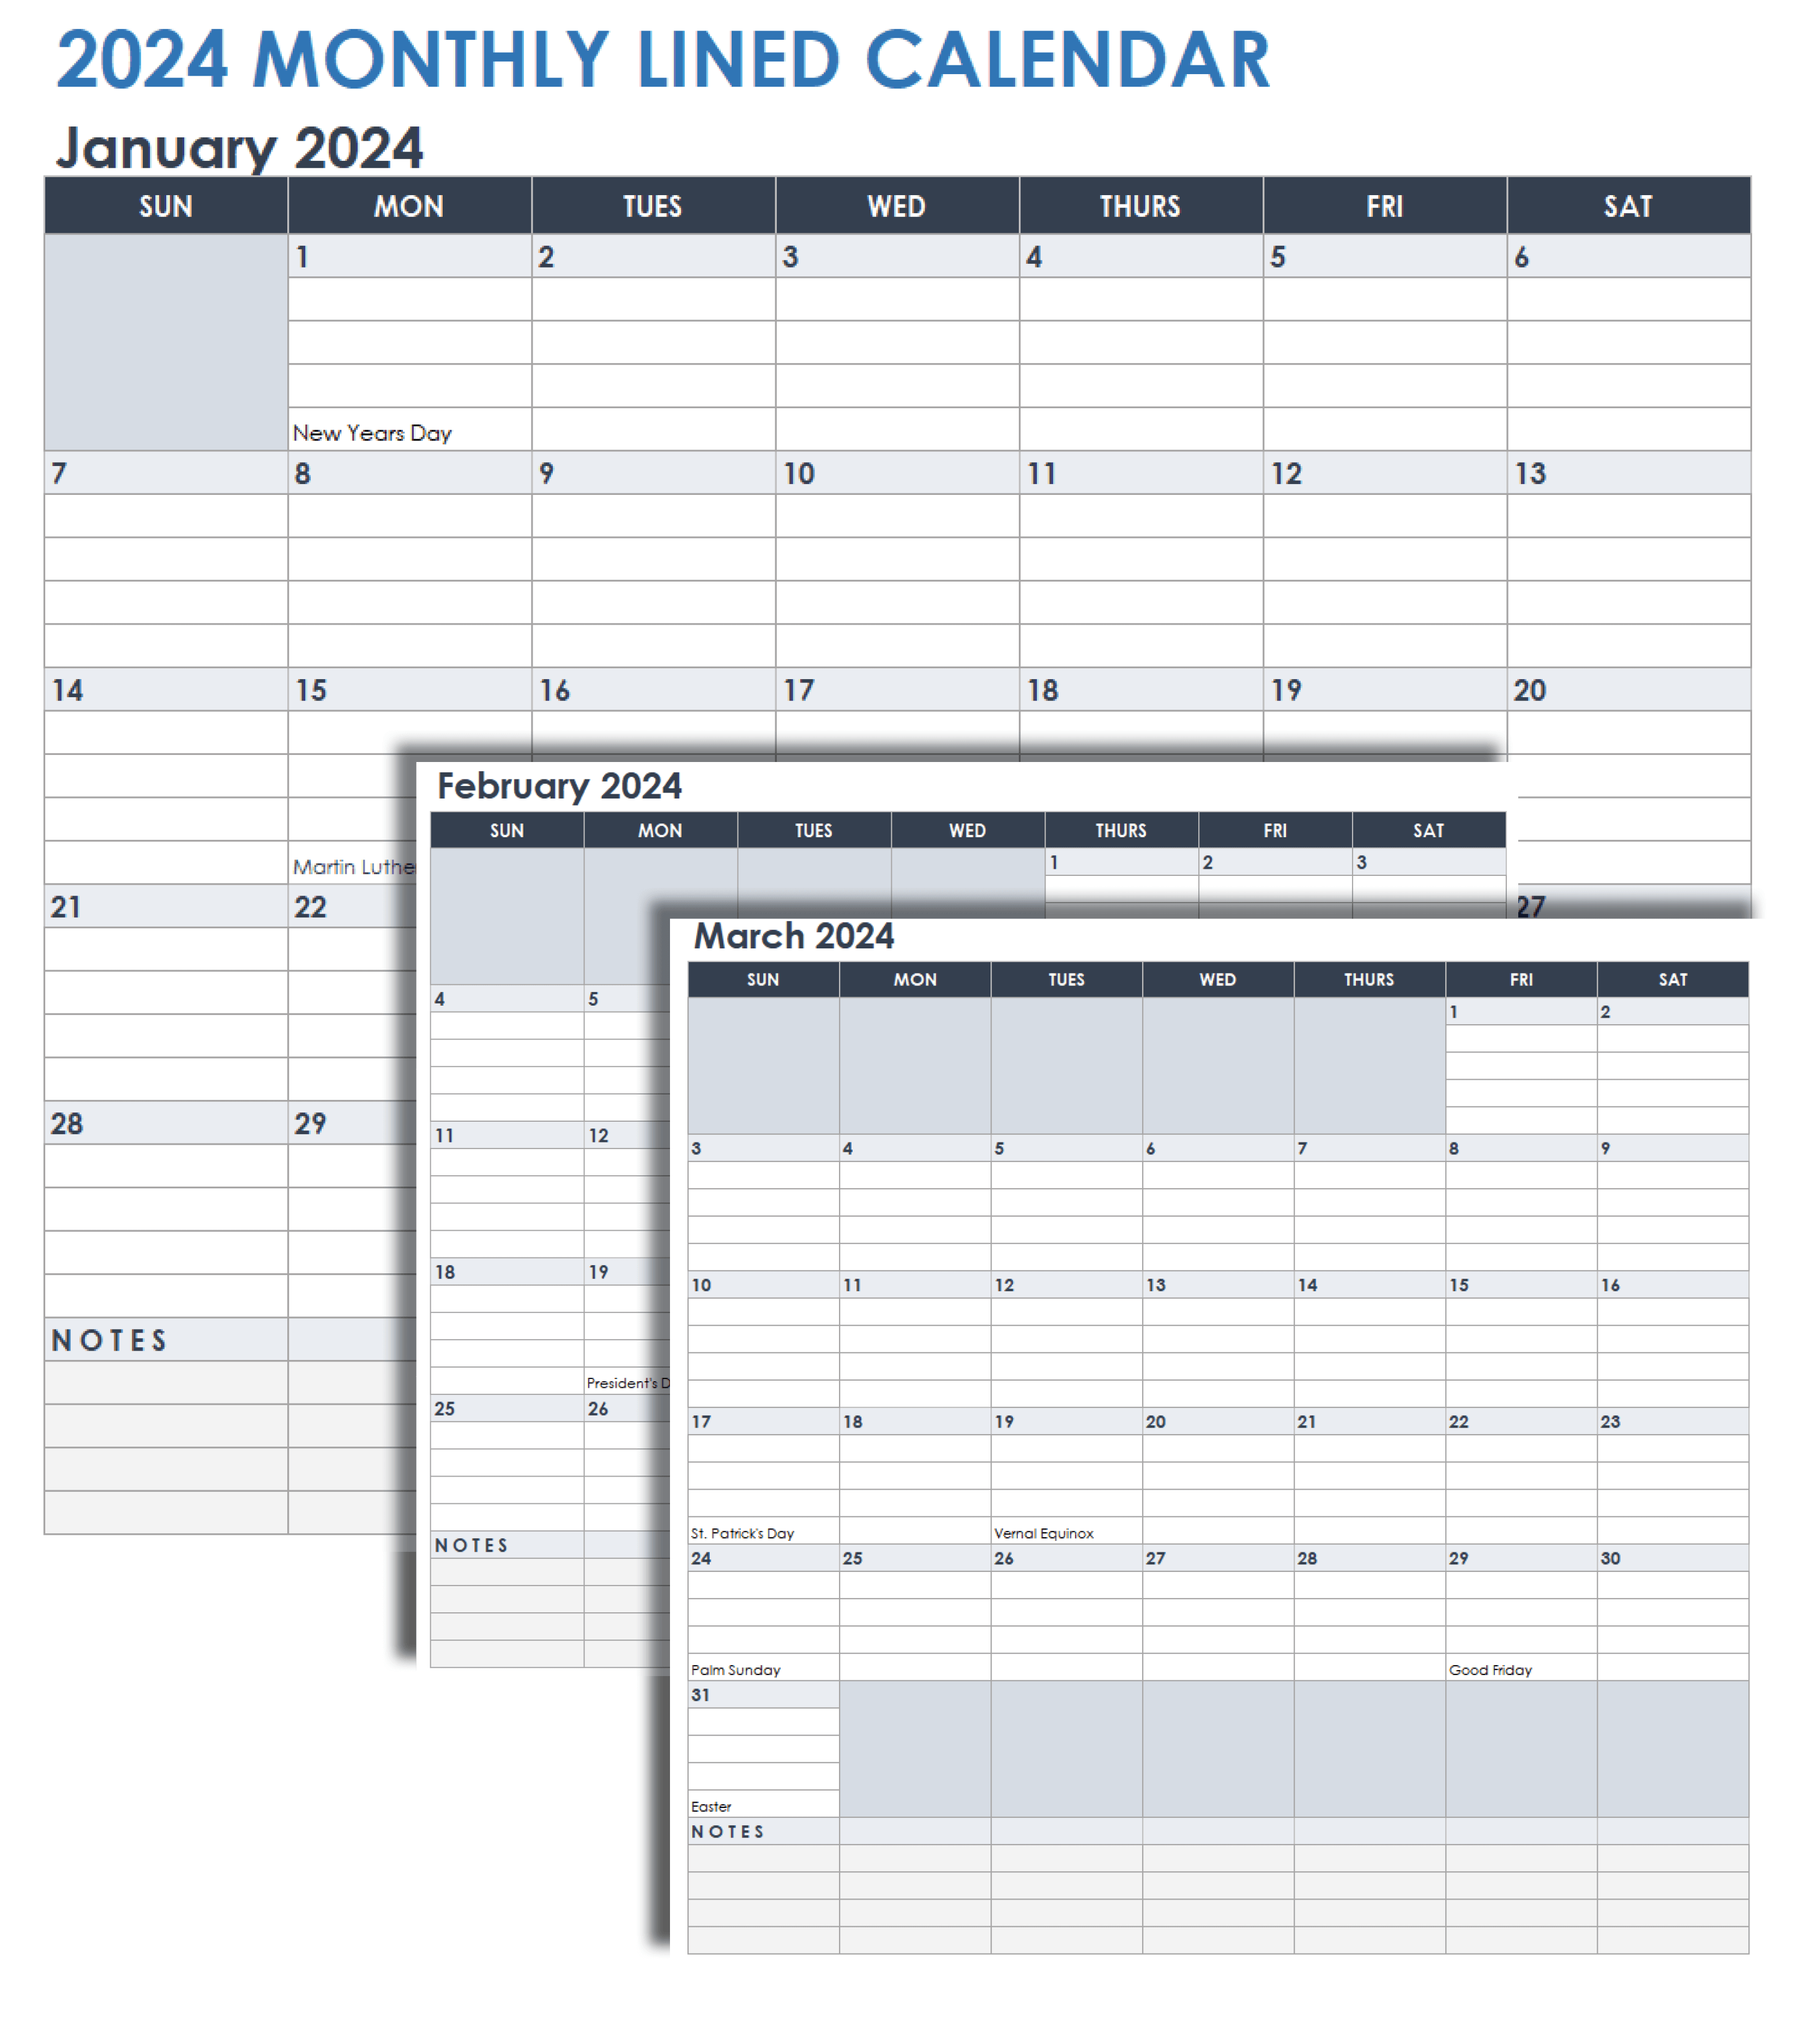 2024 Monthly Lined Calendar